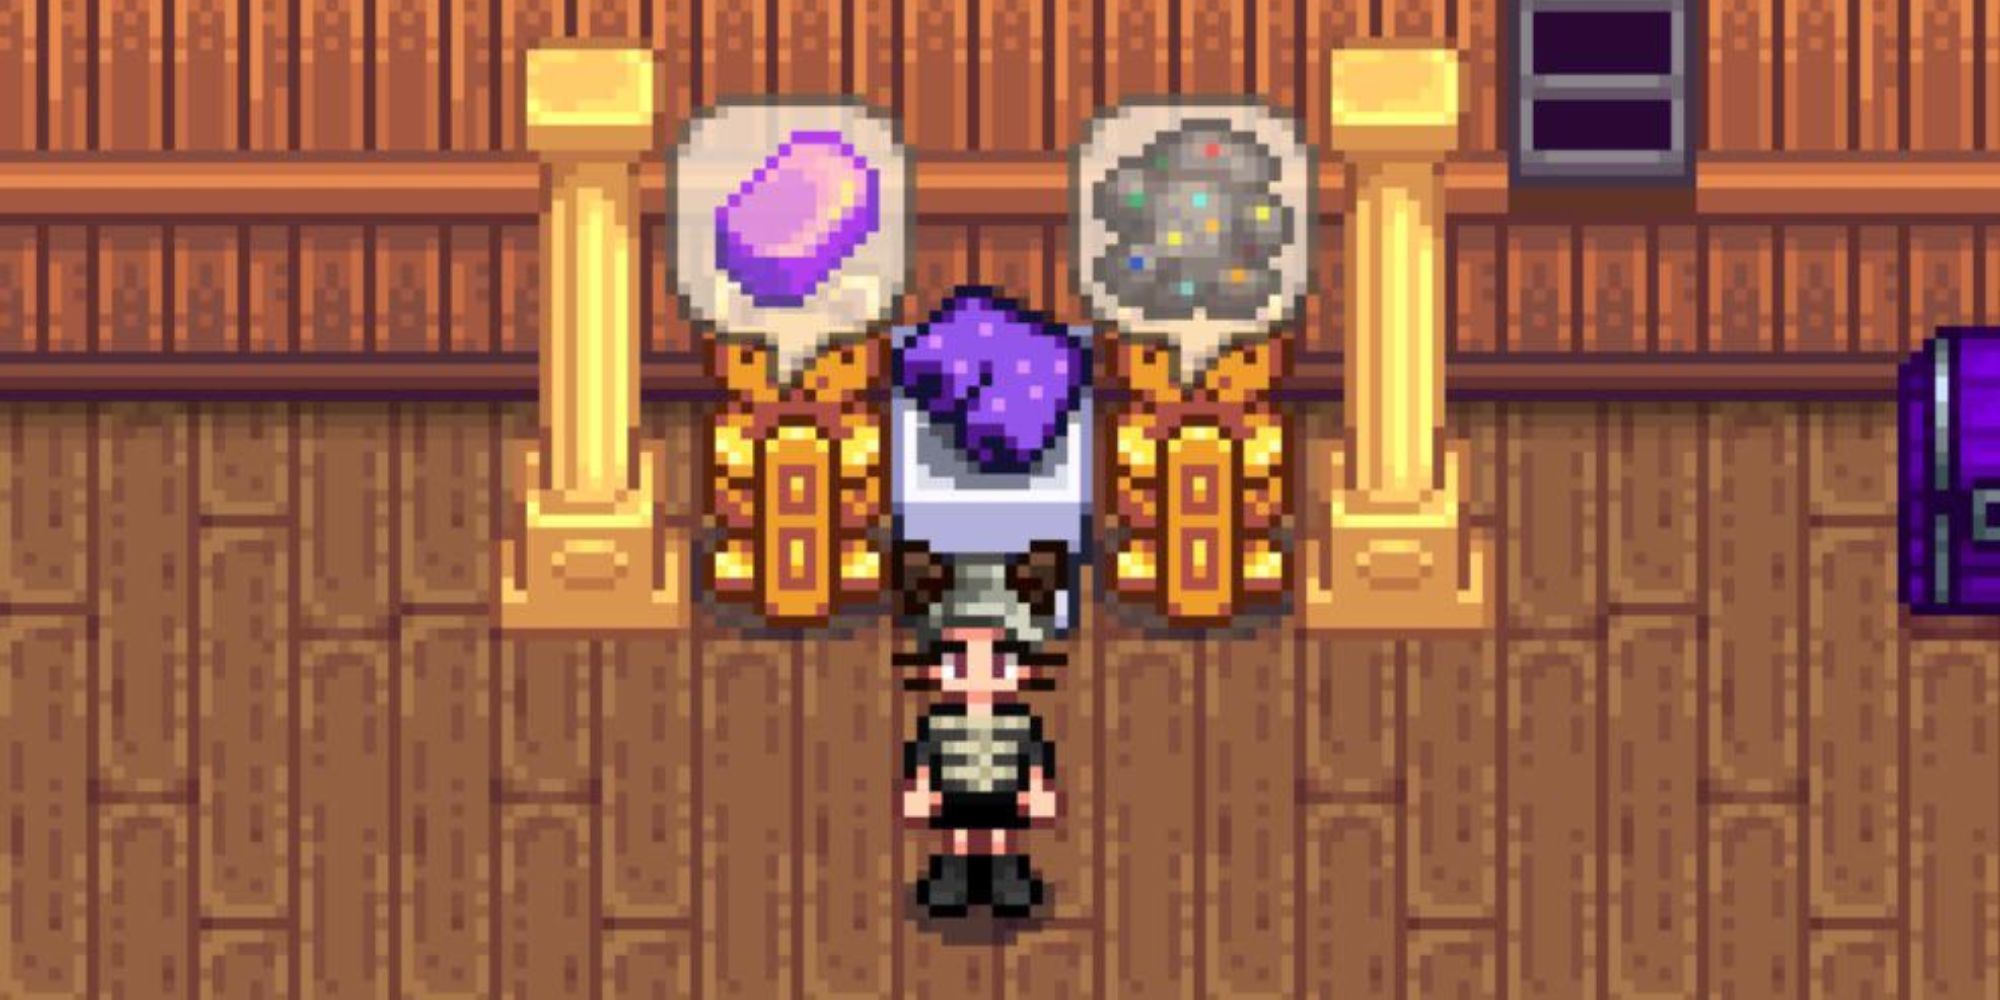 All Uses For The Purple Shorts In Stardew Valley, Ranked